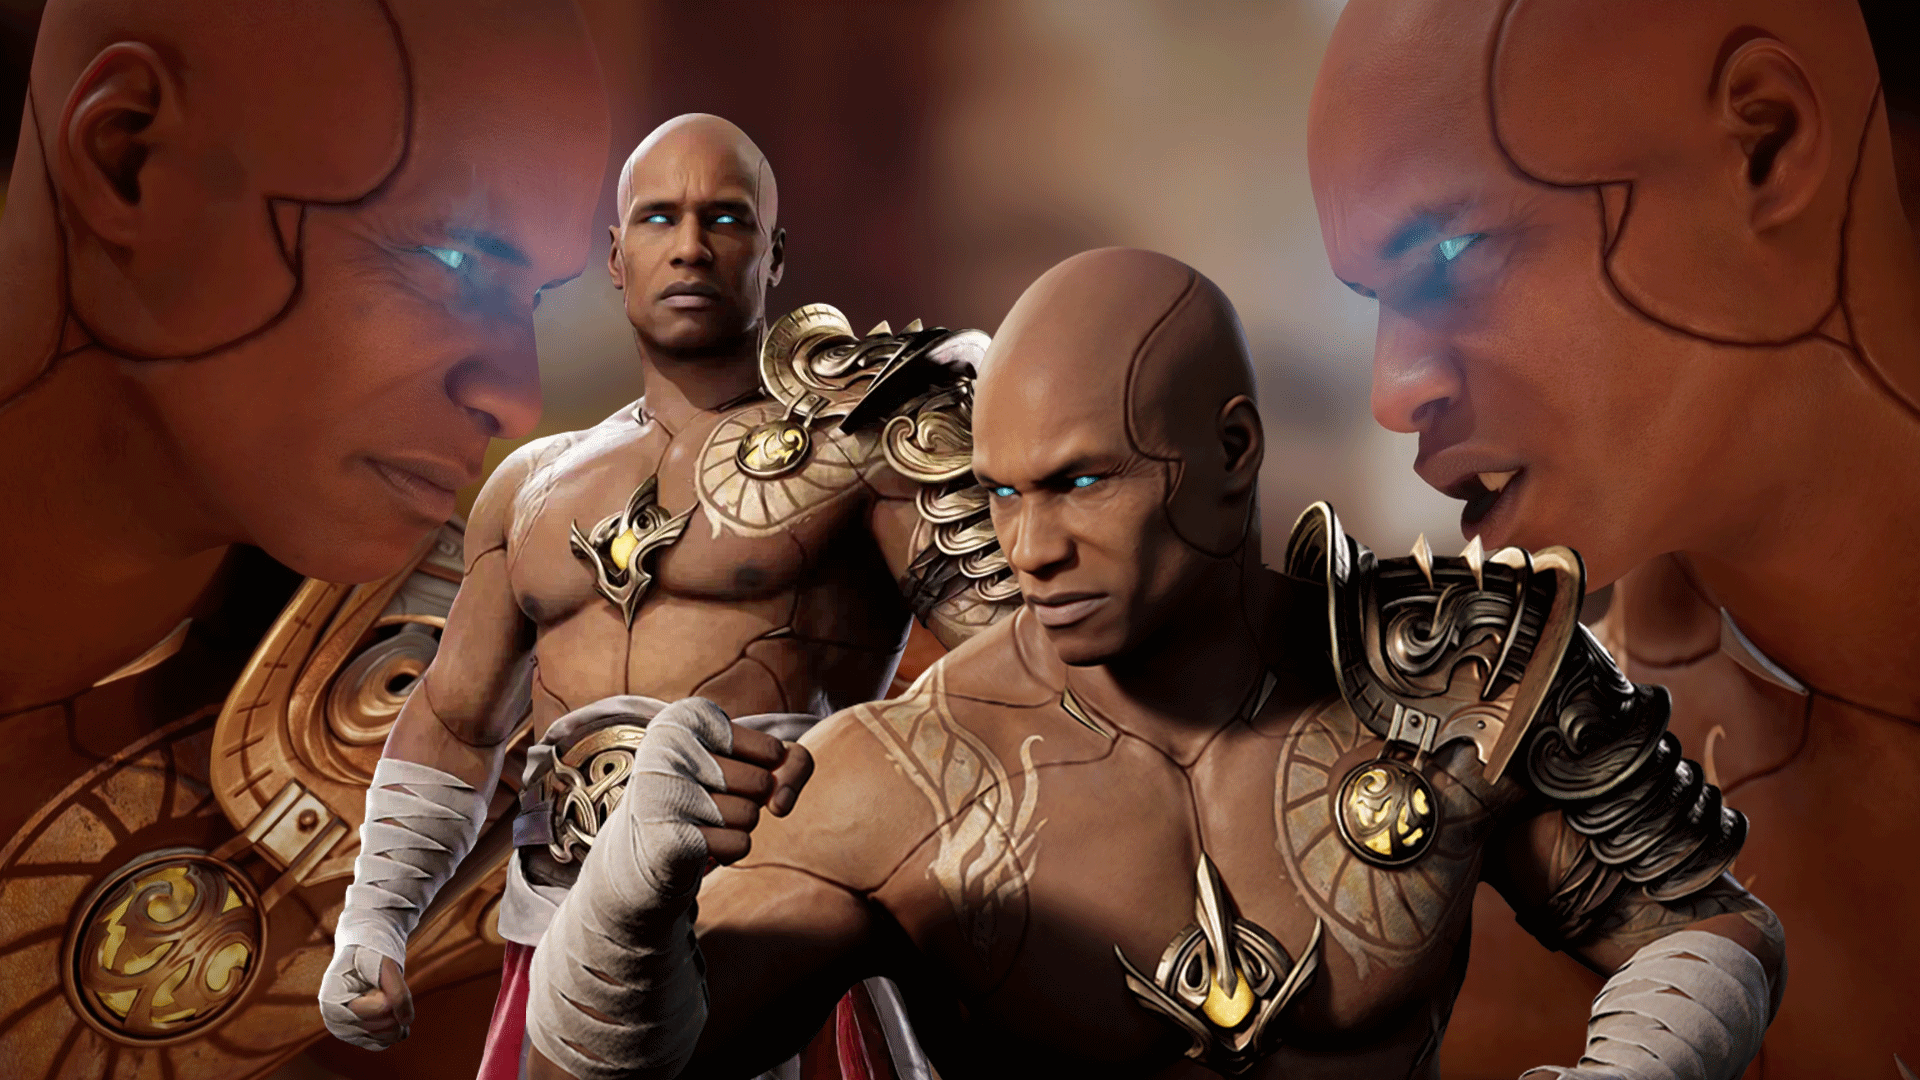 Mortal Kombat 1 Geras Character Guide: All You Need to Know